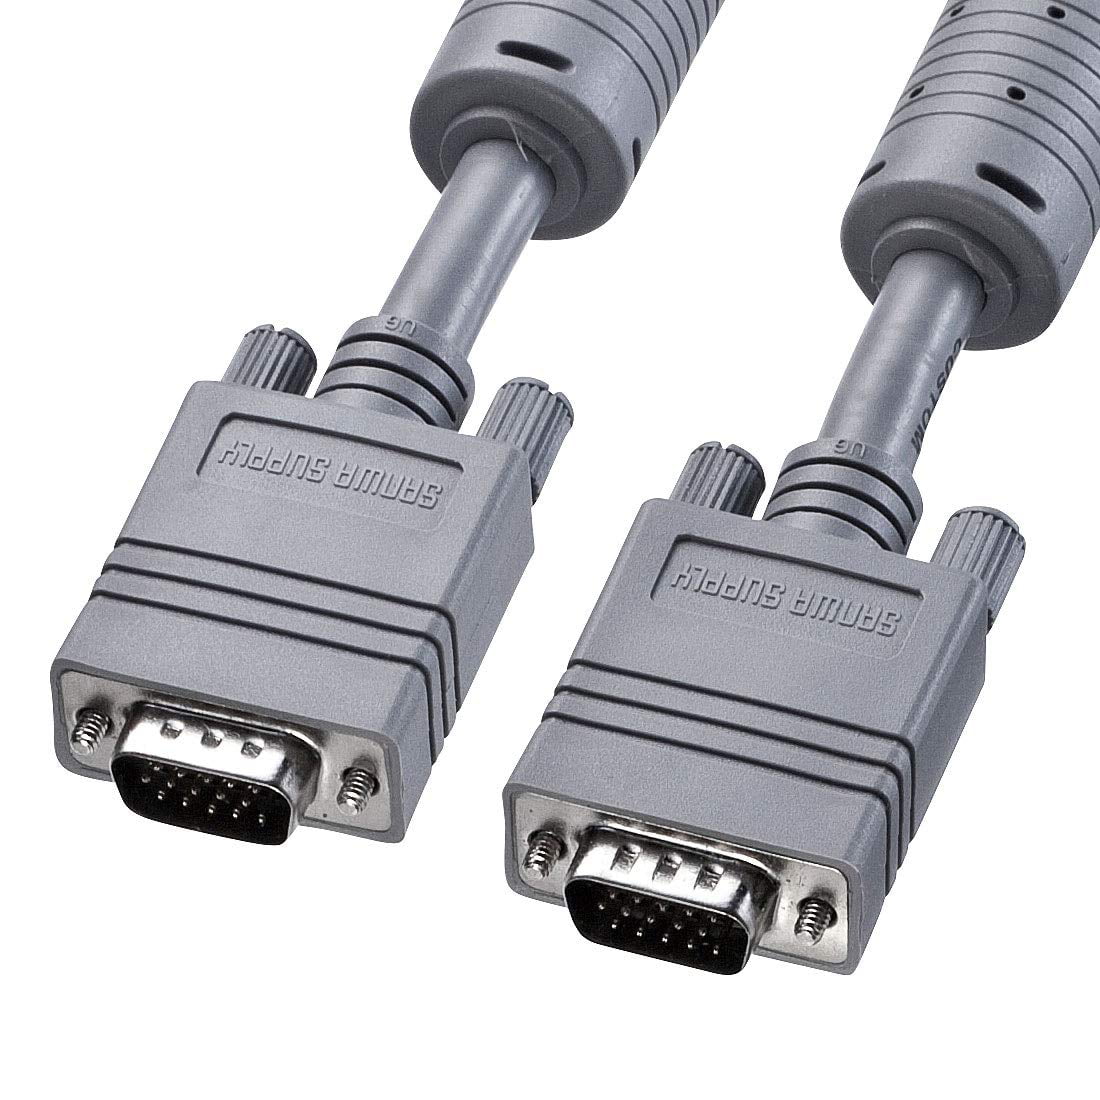 Part Number, High Speed HDMI Cable, SANWA SUPPLY